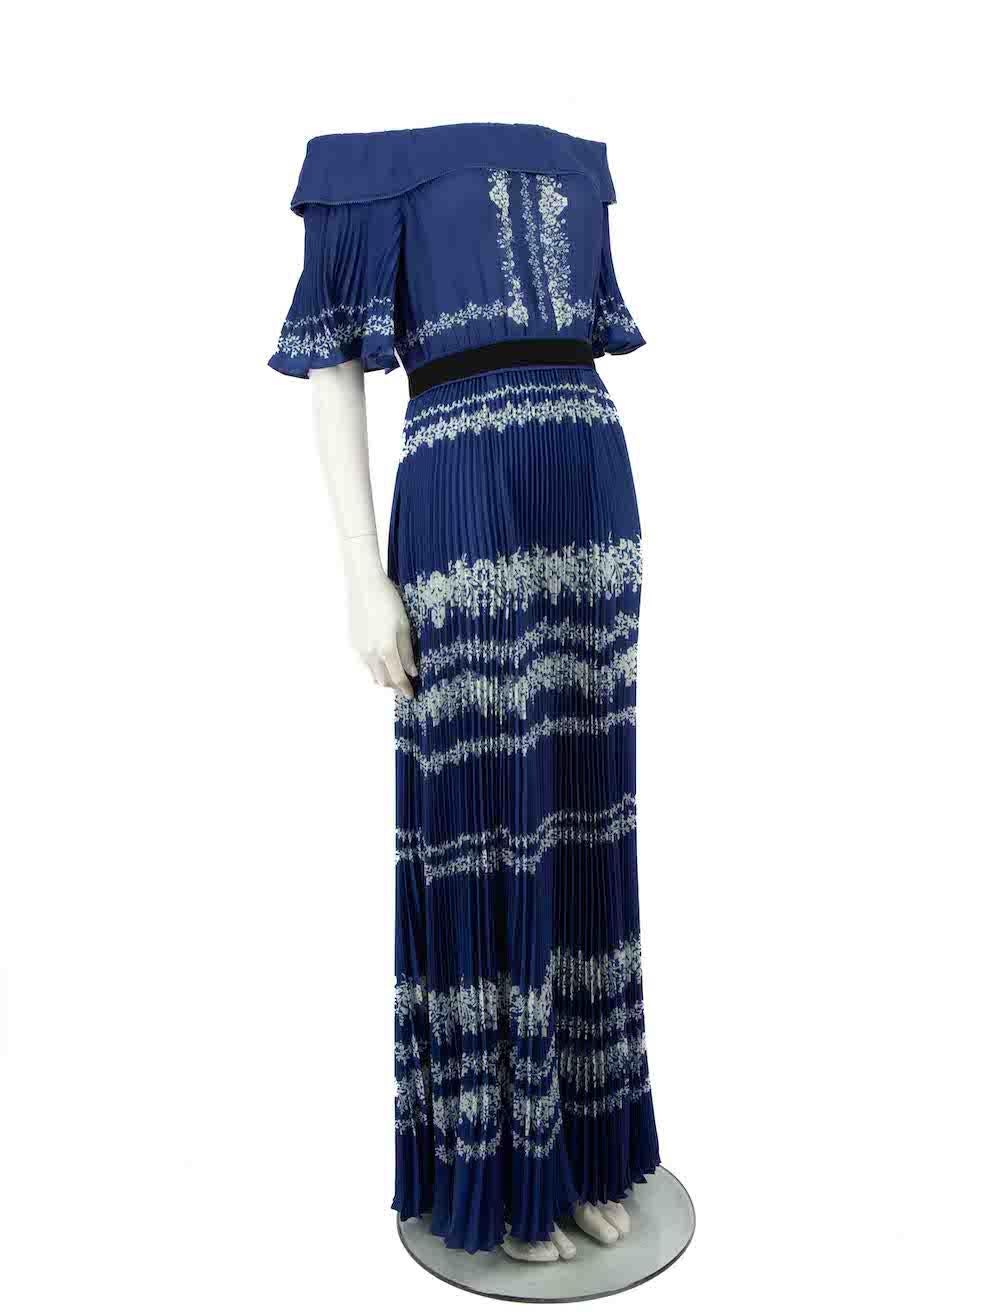 CONDITION is Very good. Minimal wear to dress is evident. Minimal wear to the front and back of the skirt with plucks to the weave on this used Self-Portrait designer resale item.
 
 
 
 Details
 
 
 Blue
 
 Polyester
 
 Maxi dress
 
 Floral